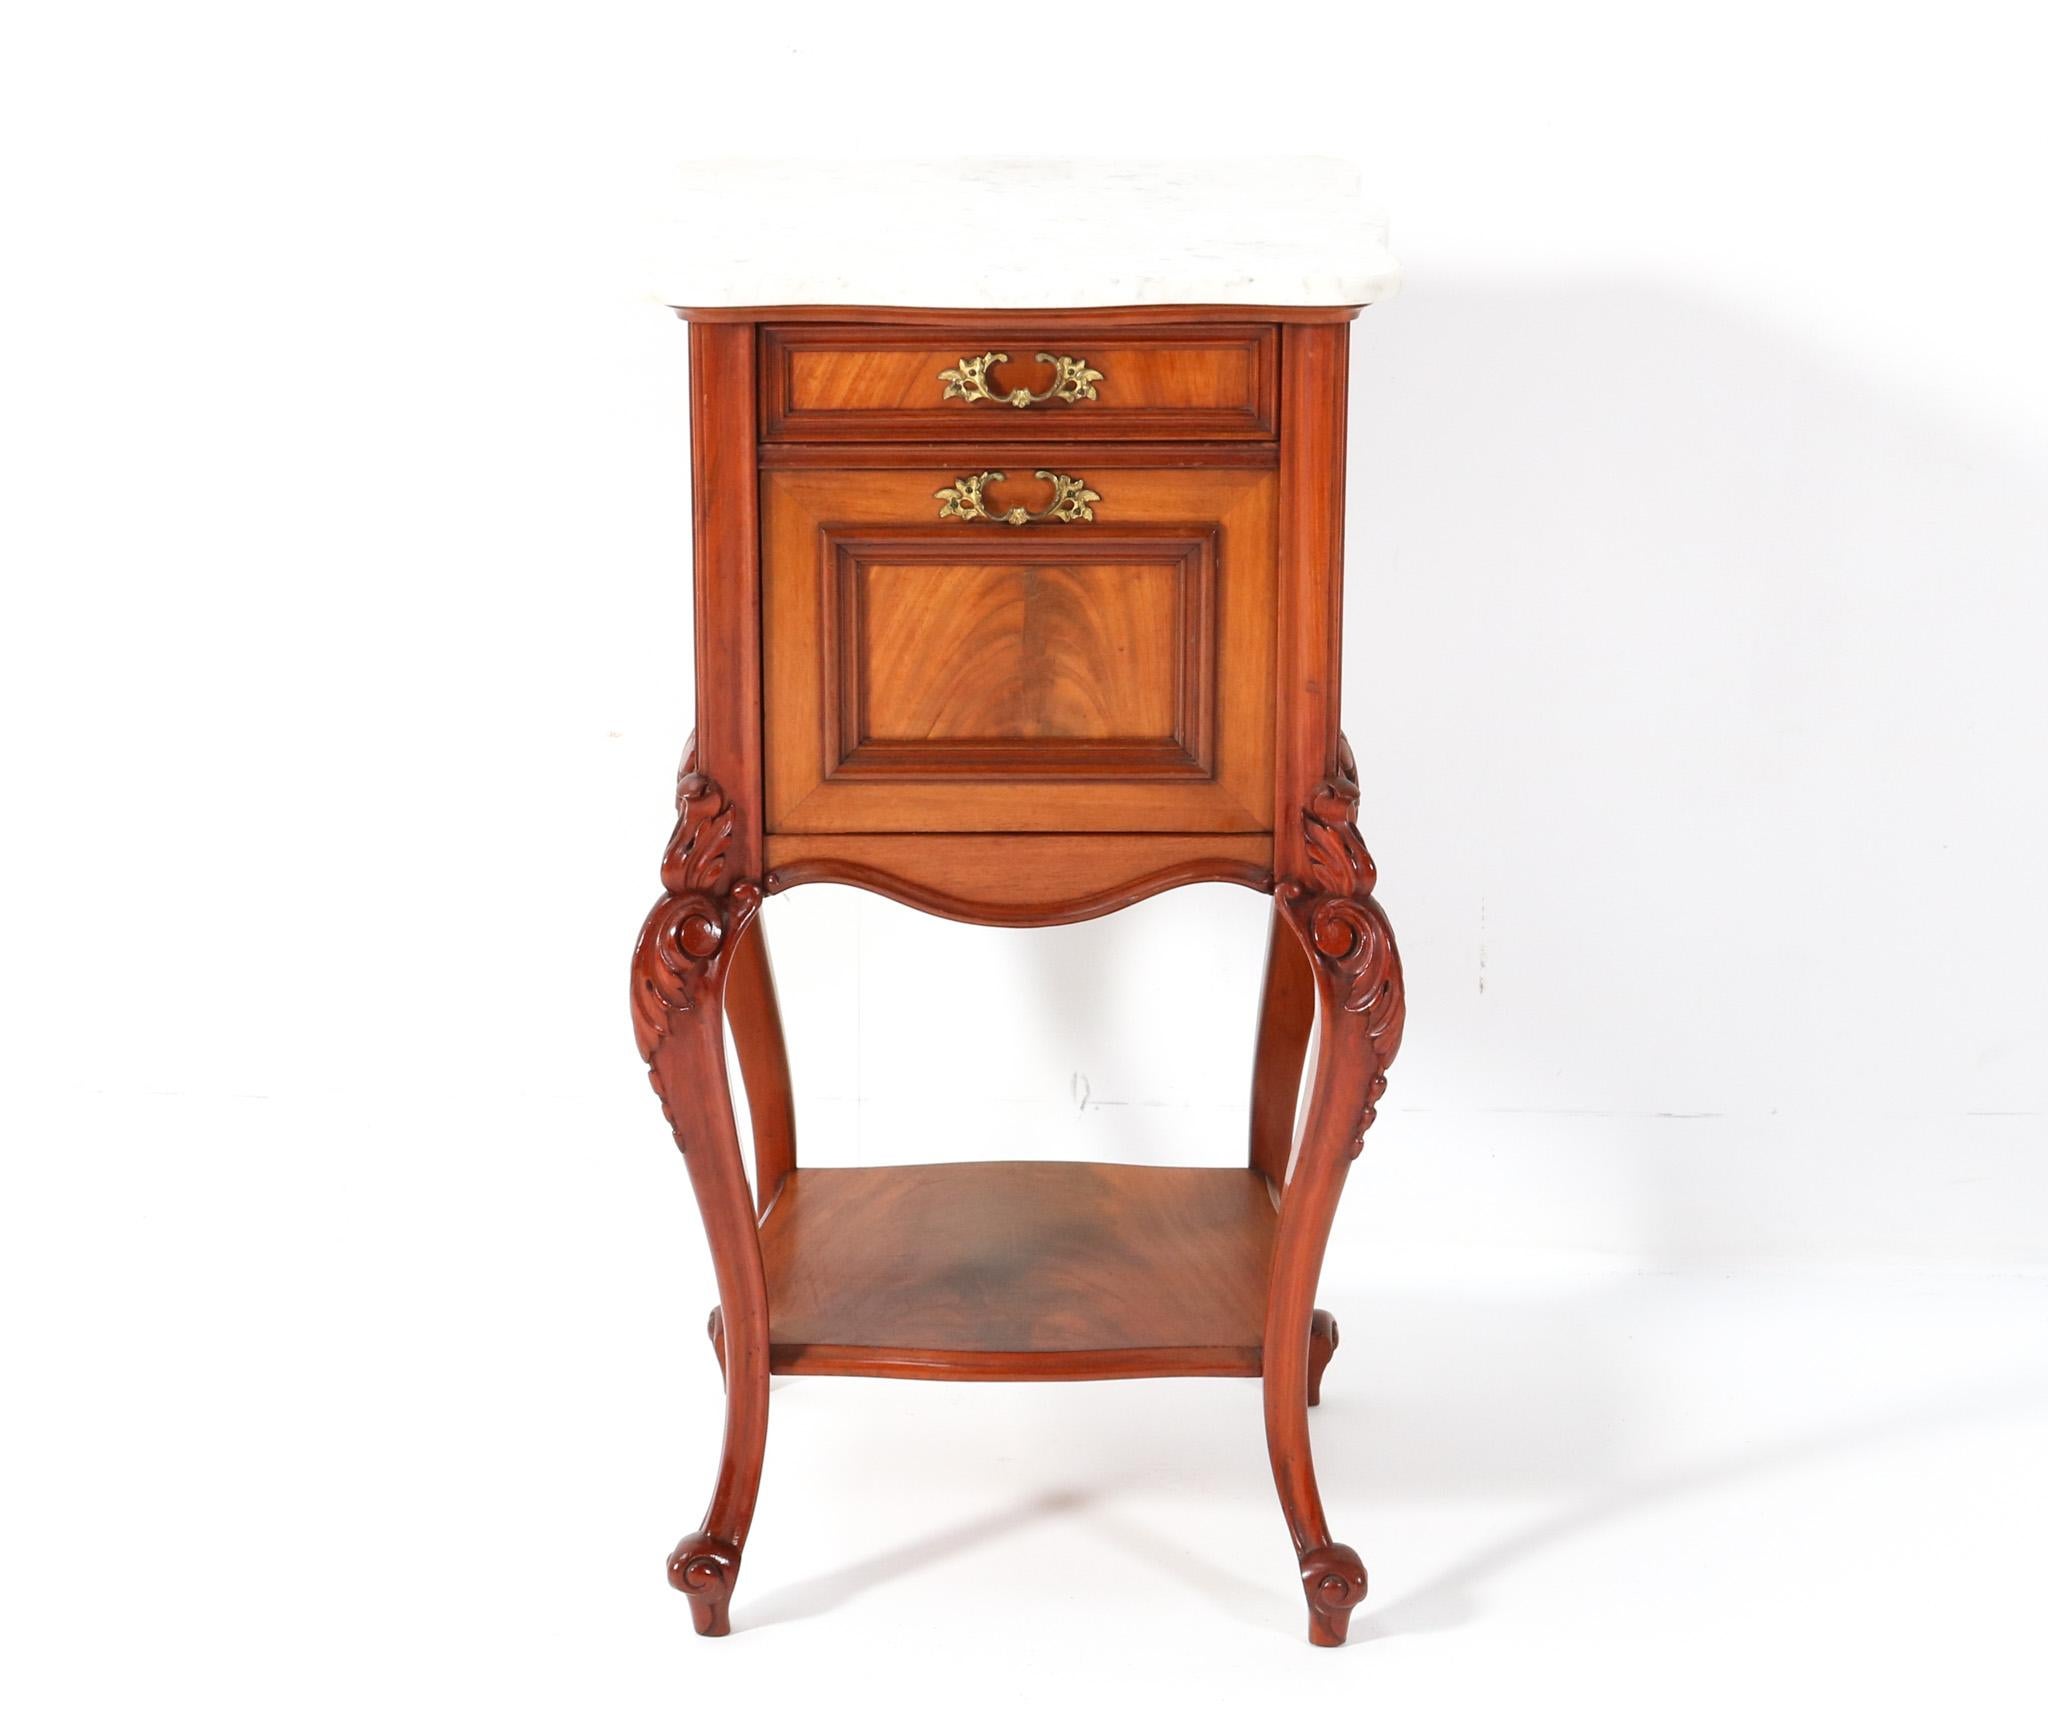 Stunning and rare Louis XV style nightstand or bedside table.
Striking French design from the 1900s.
Solid walnut base with original bronze handles on door and drawer.
Original curved white marble top.
This wonderful Louis XV style nightstand or